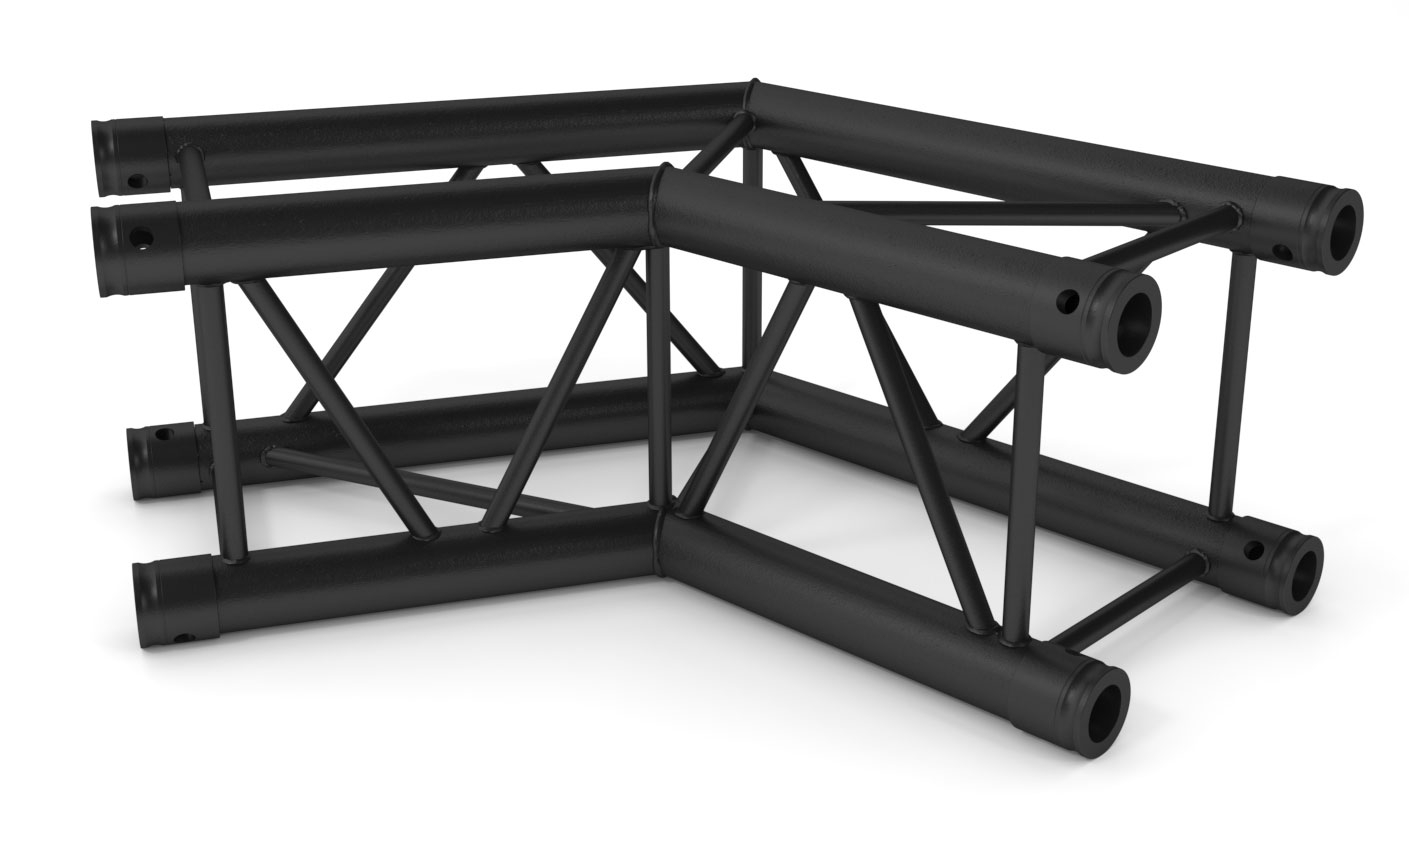 TRUSS Quatro 290 angle - 50cm - 120- - 2 directions - black - Connection kit included